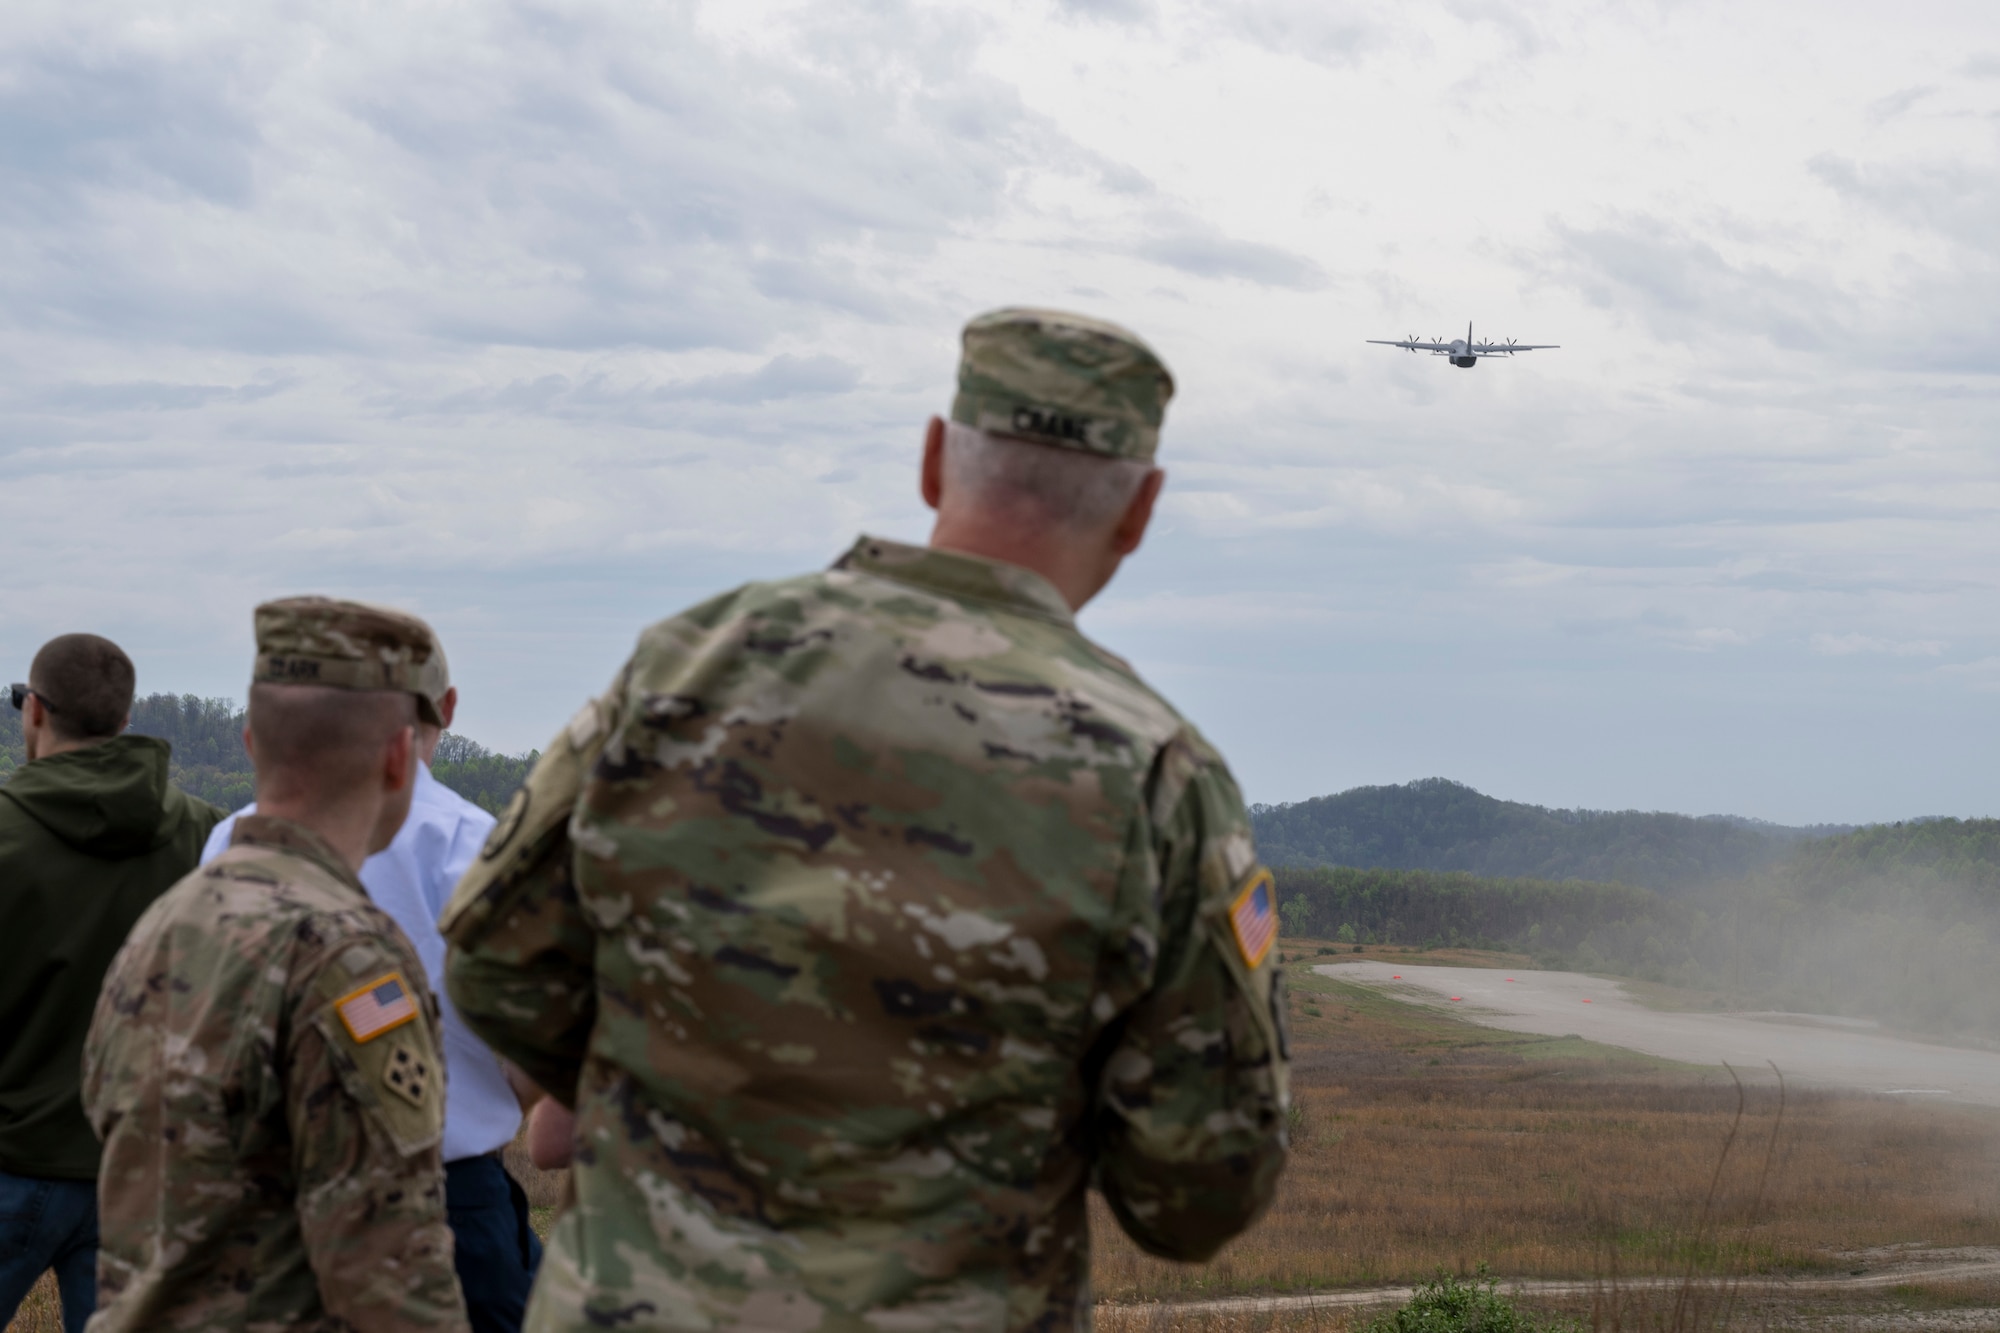 A U.S. Air Force C130J-30 assigned to the 130th Airlift Wing, West Virginia Air National Guard, takes off from an unpaved runway as Distinguished Visitors (DV) look on during Sentry Storm 24 DV Day, April 17, 2024, at Camp Branch, Logan County, W.Va. Sentry Storm is an exercise staged at McLaughlin ANGB in Charleston, Camp Branch in Logan County, Shepherd Field in Martinsburg and in the skies over West Virginia, involving an estimated 500 personnel from the state’s Air and Army National Guard, partnering National Guard units form Kentucky, North Carolina, and Michigan, as well as Civil Air Patrol units. (U.S. Air National Guard photo by 2nd Lt. De-Juan Haley)